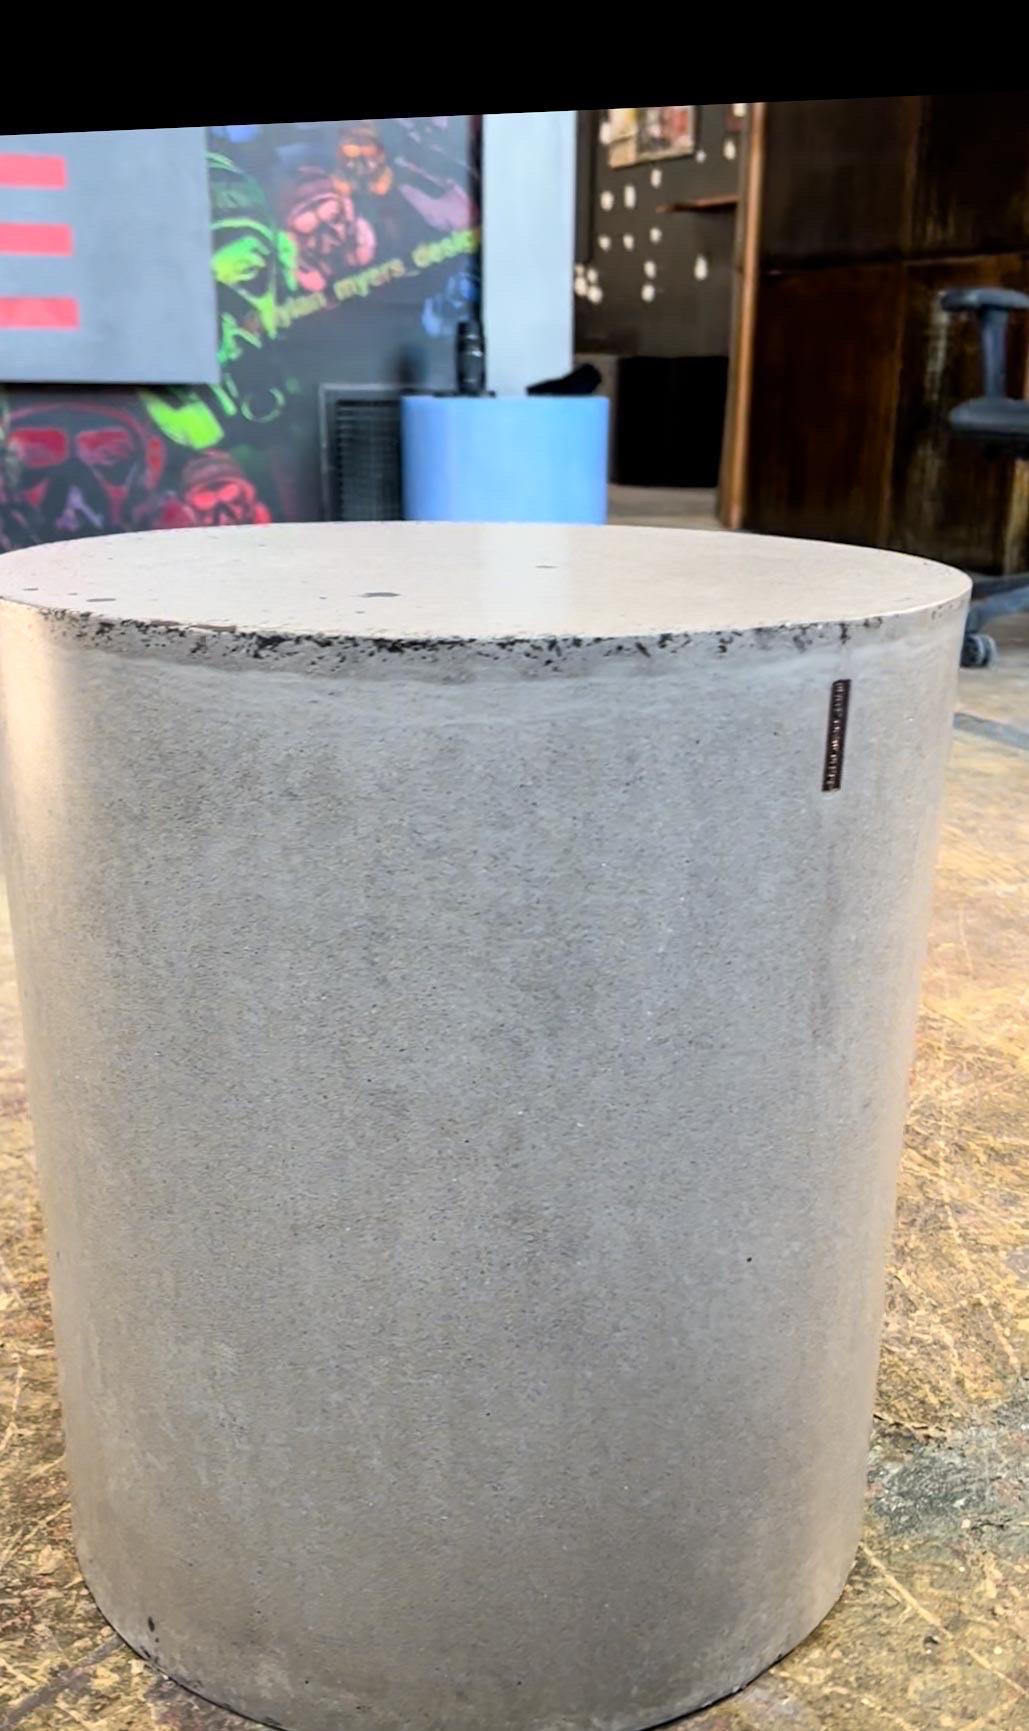 Line Zero Collection, by Dylan Myers, is a representation of his journy into the world of concrete and art. 

Concrete is the most basic building material, while yet at the same time the most complex, once one starts to dig deeper.  This is exactly